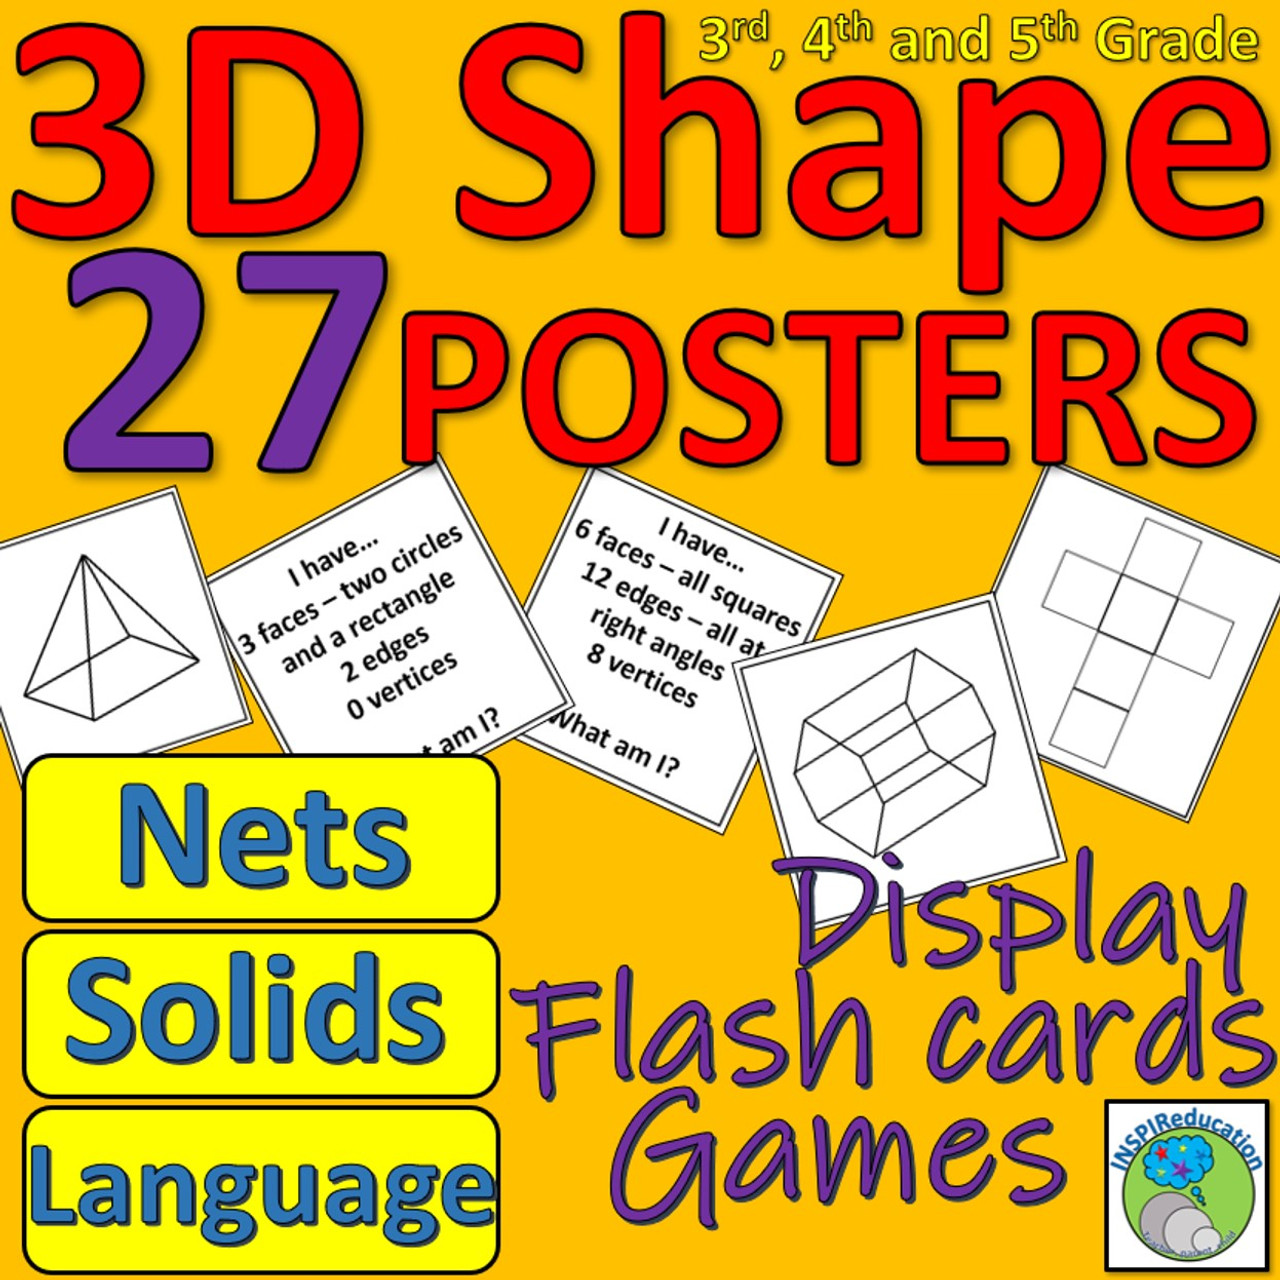 3D Shapes - 27 Posters, shapes, nets and desciptions